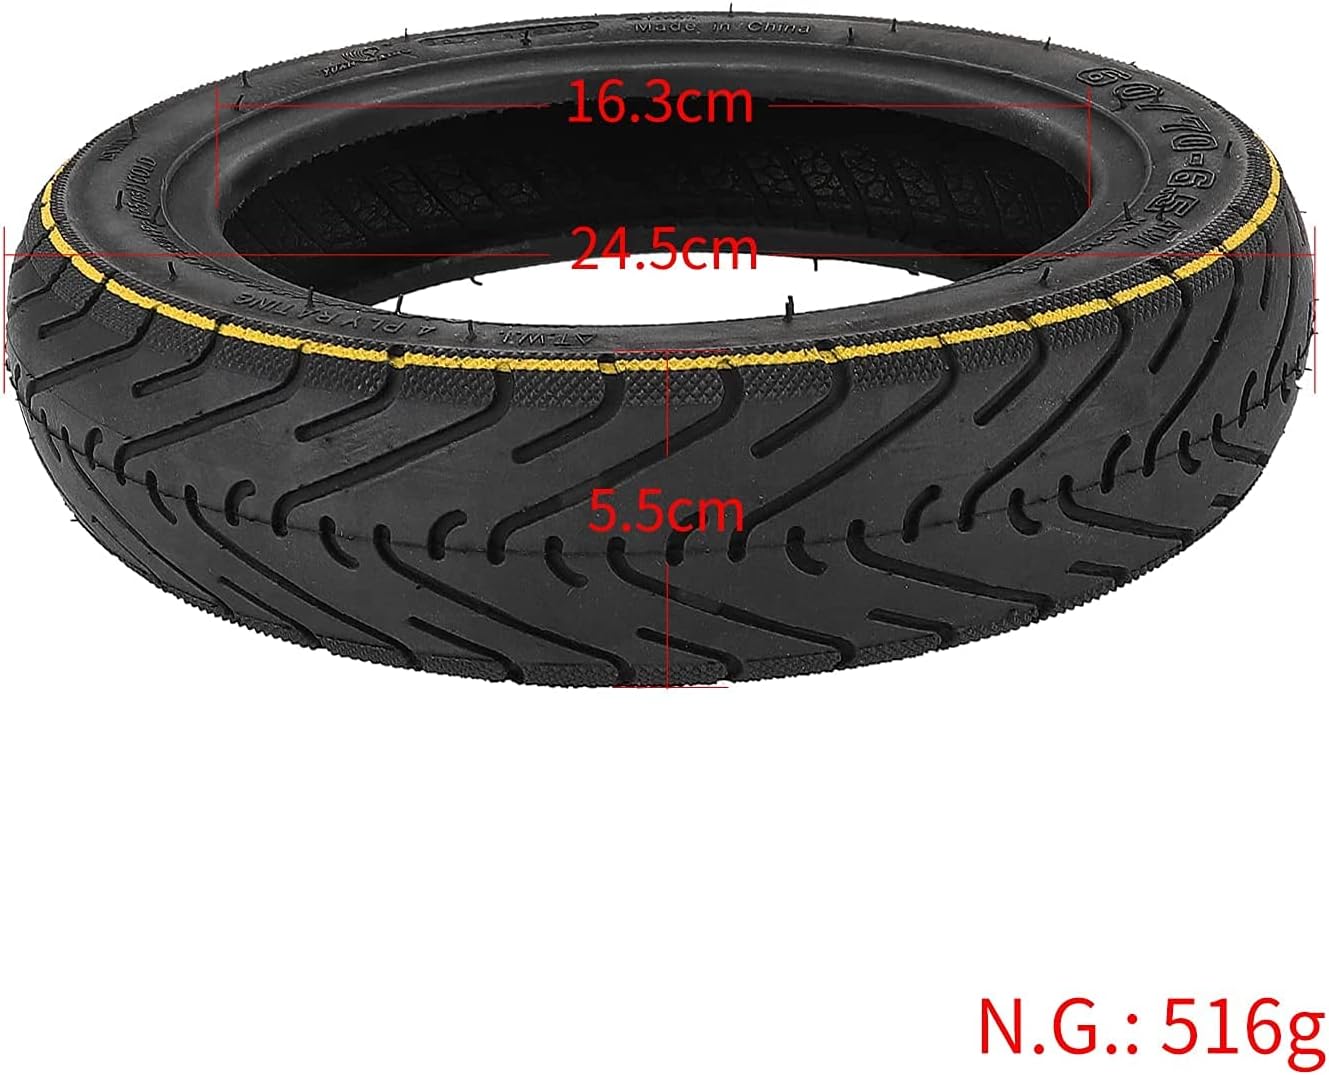 Tubeless Tire 60/70-6.5 - For Ninebot G30 Max Scooter